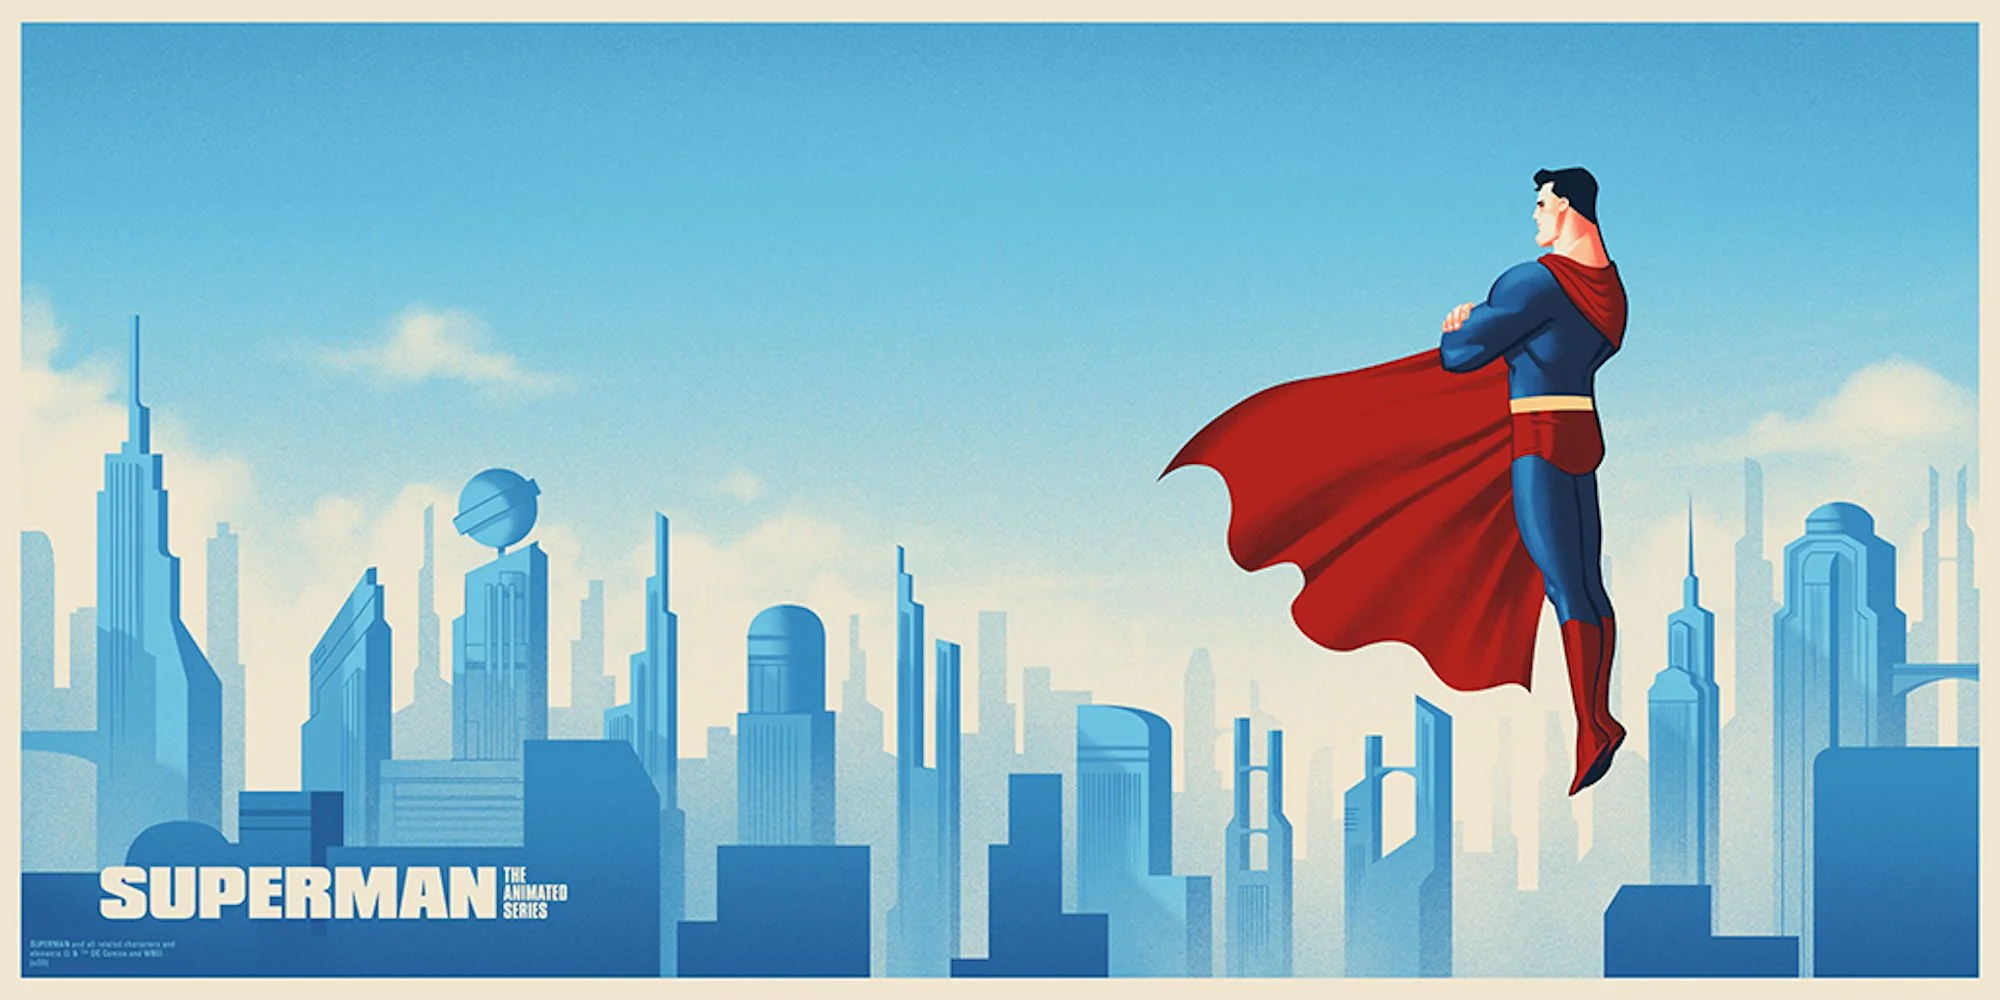 Superman: The Animated Series Picture by Phantom City Creative